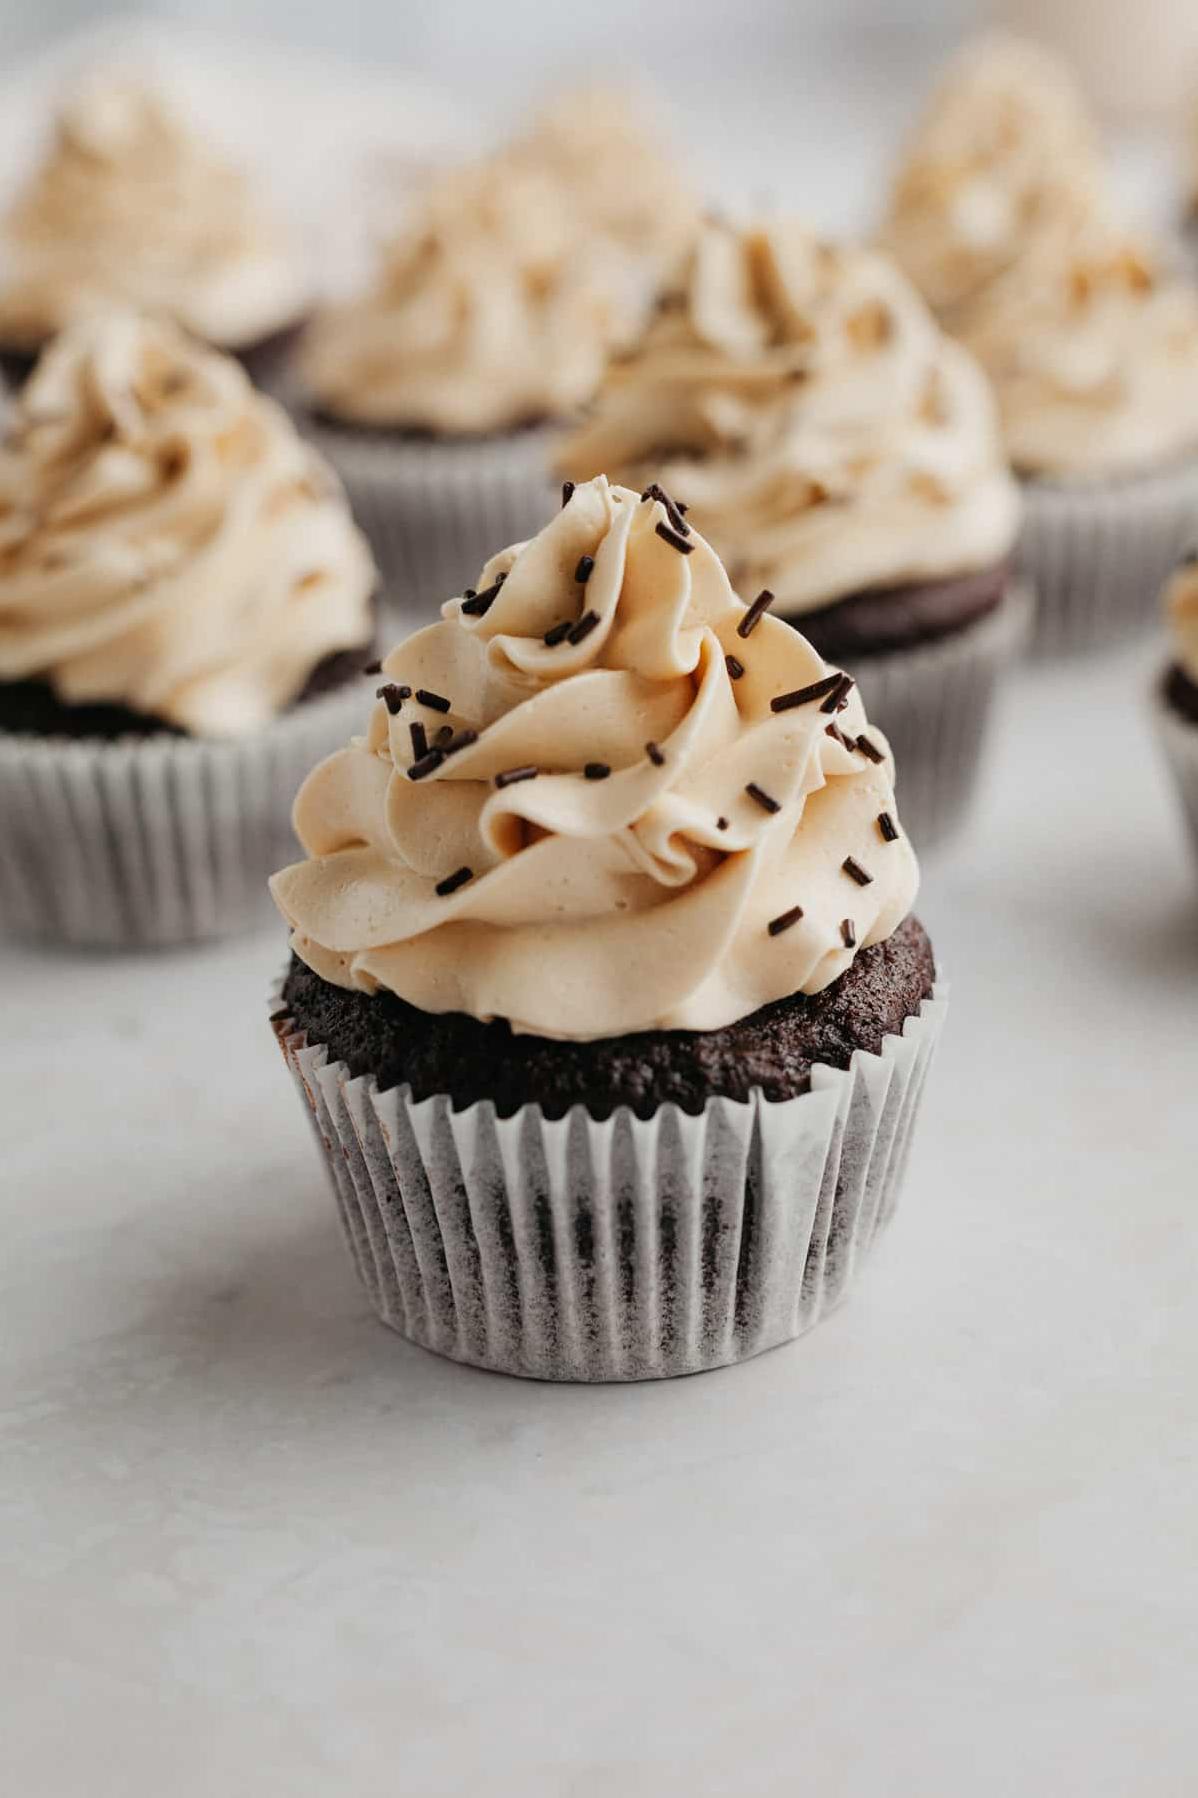  Our Mocha Cupcakes are the perfect treat for any coffee lover!